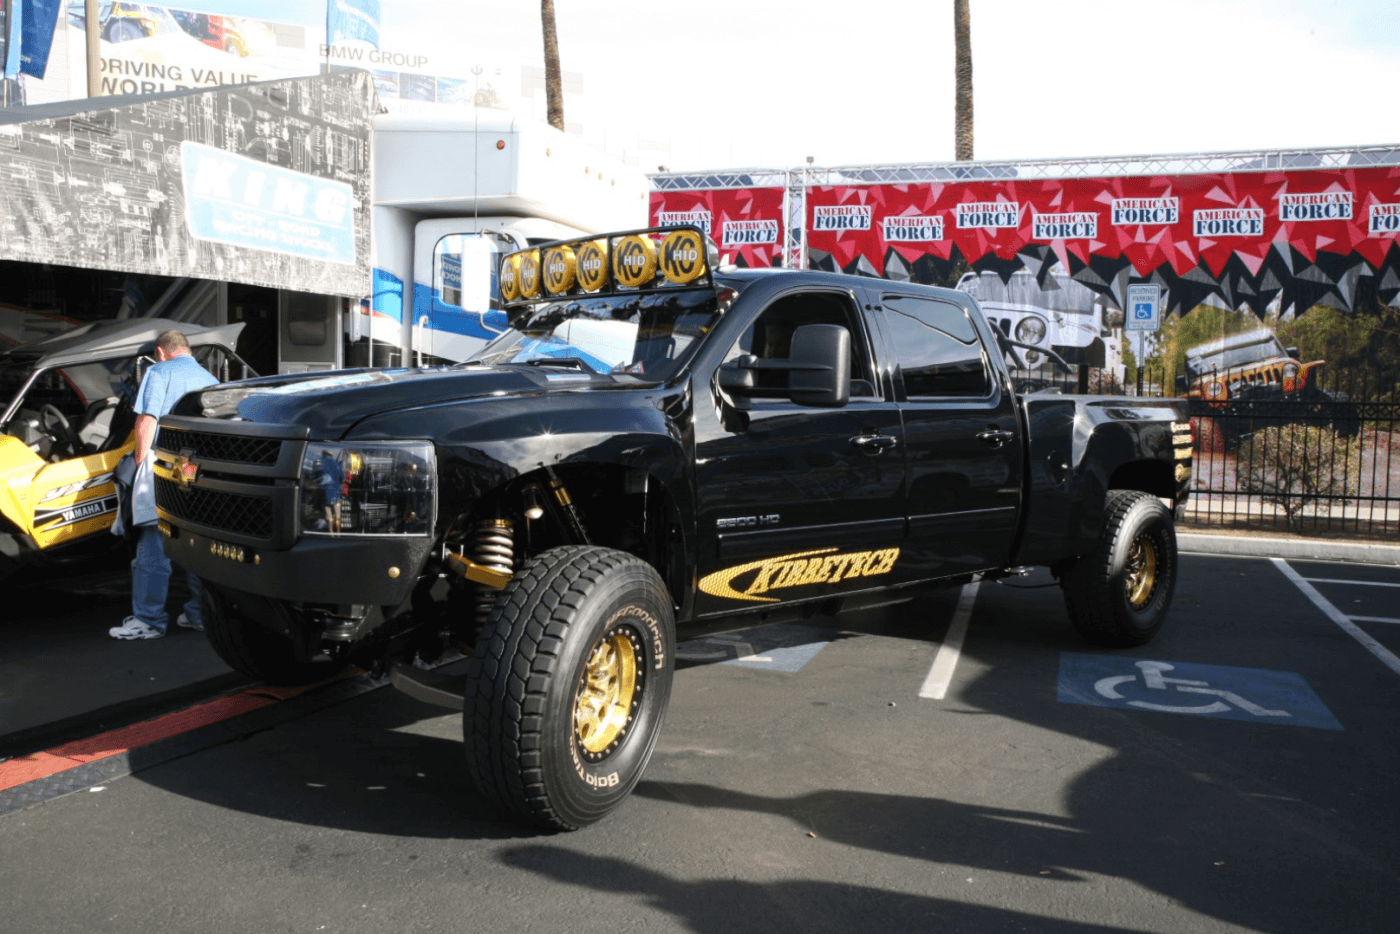 The BugattiMax is one clean and high-end Duramax-powered off-road Pre-Runner built by Kibbetech in Newbury Park, California. And it’s for sale people! 